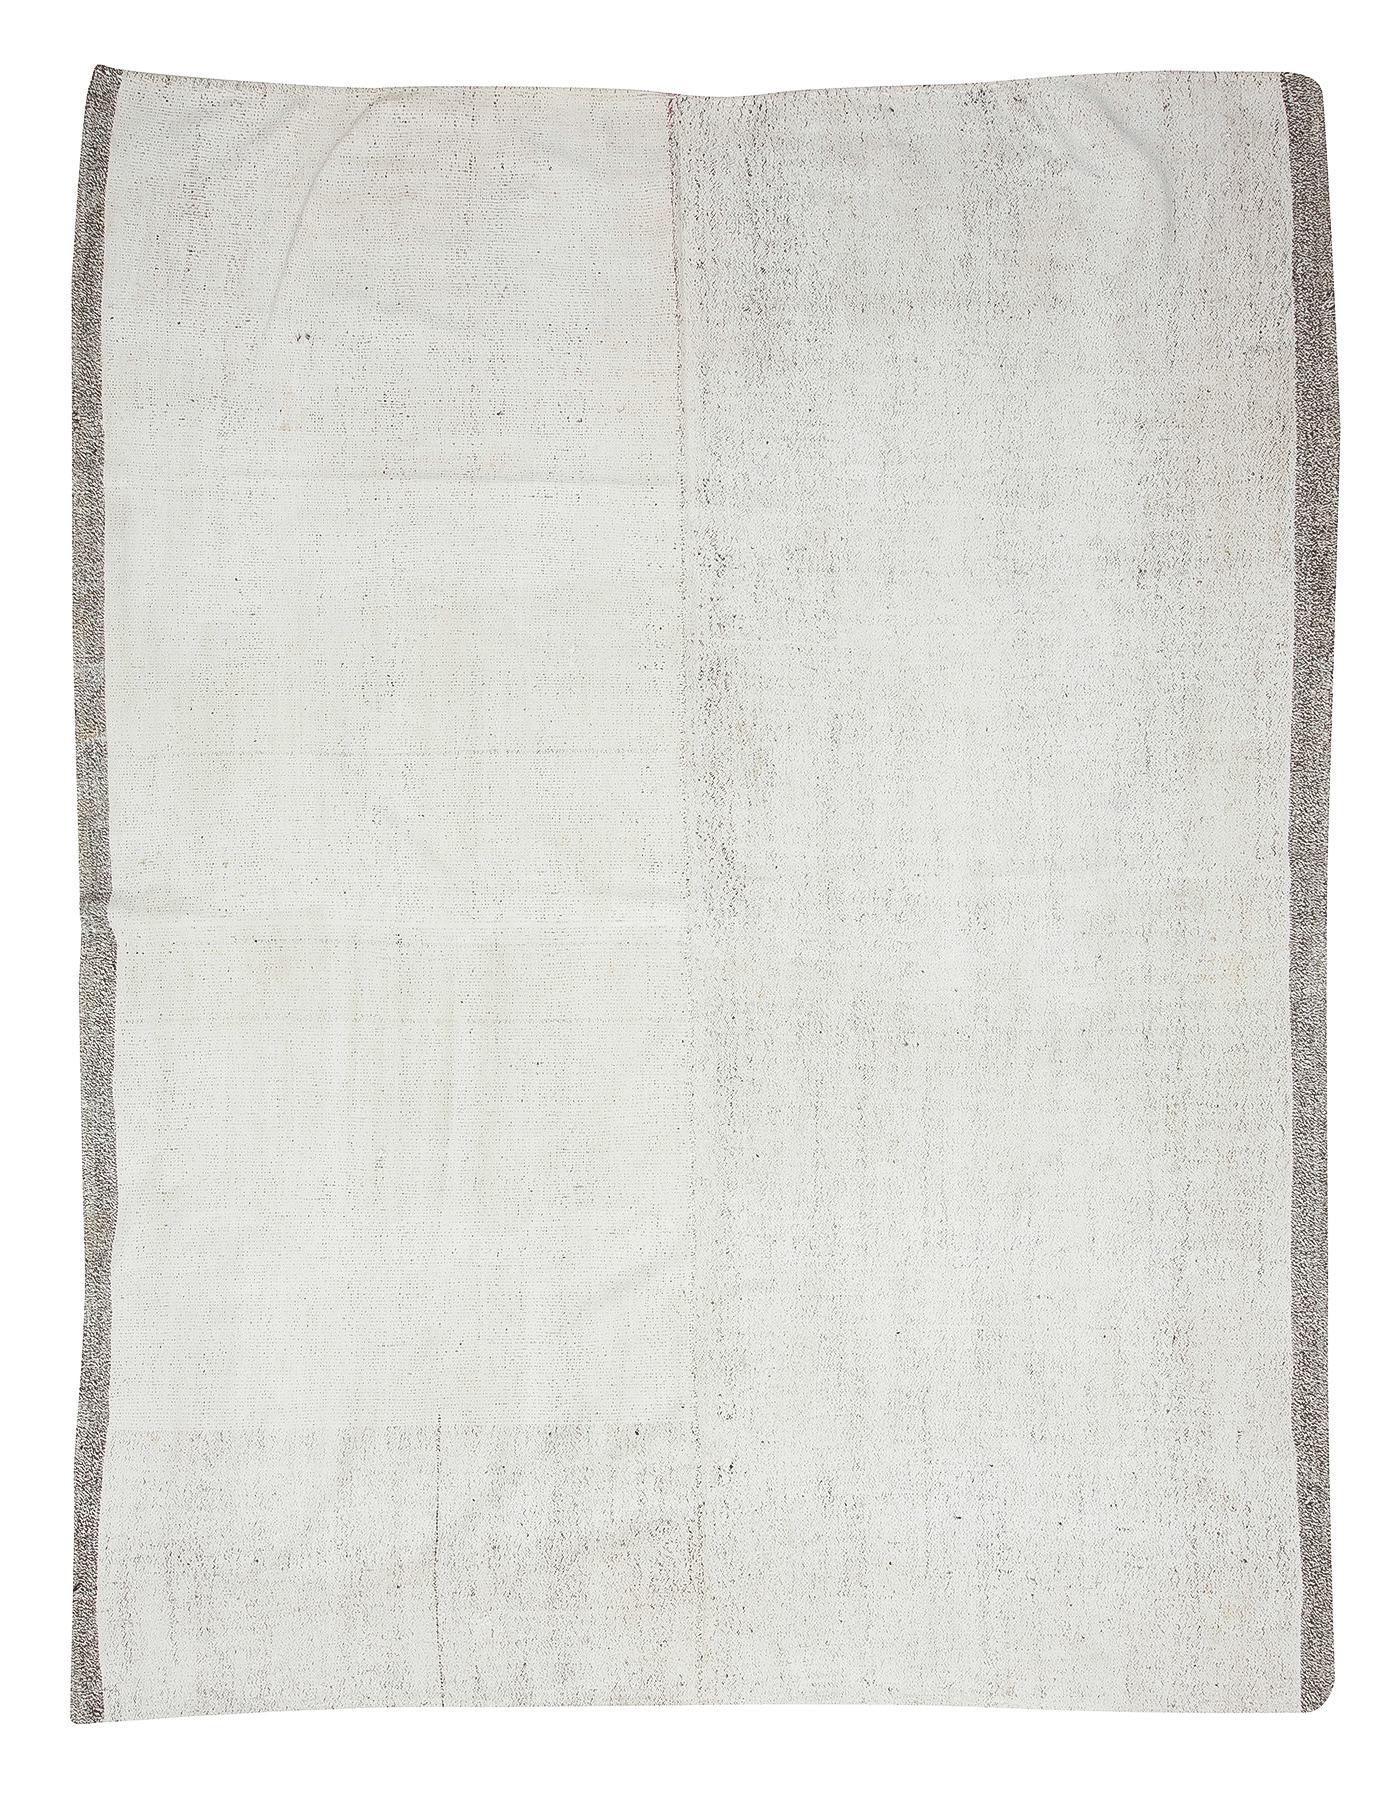 Hanne Rug 200x300 cm, Grey/Off-white - Jakobsdals @